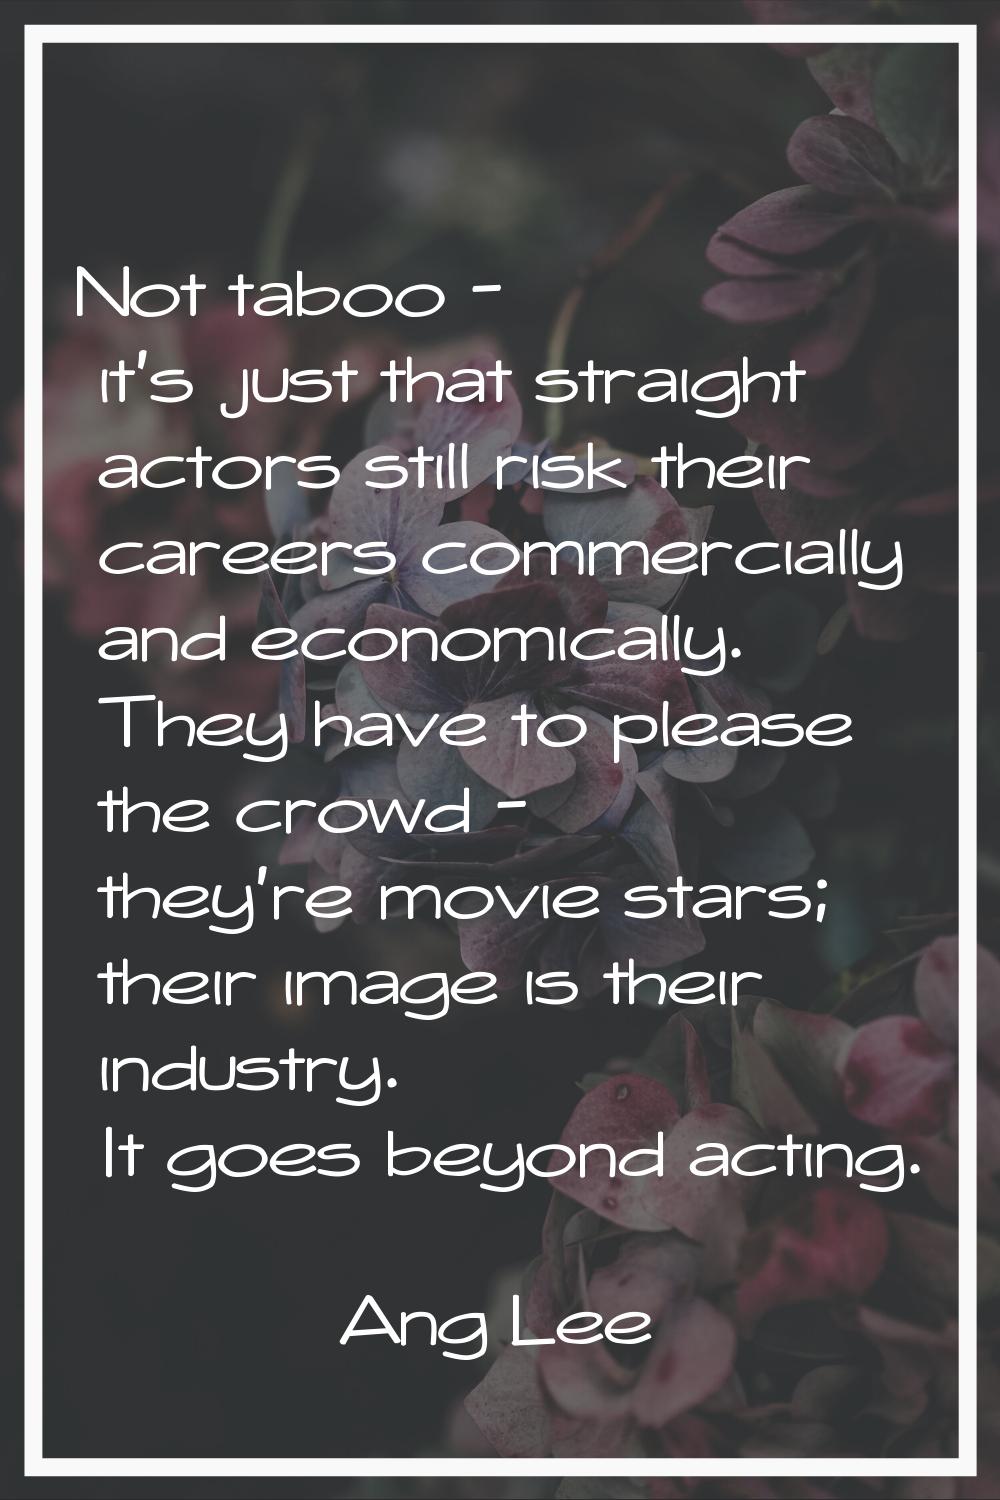 Not taboo - it's just that straight actors still risk their careers commercially and economically. 